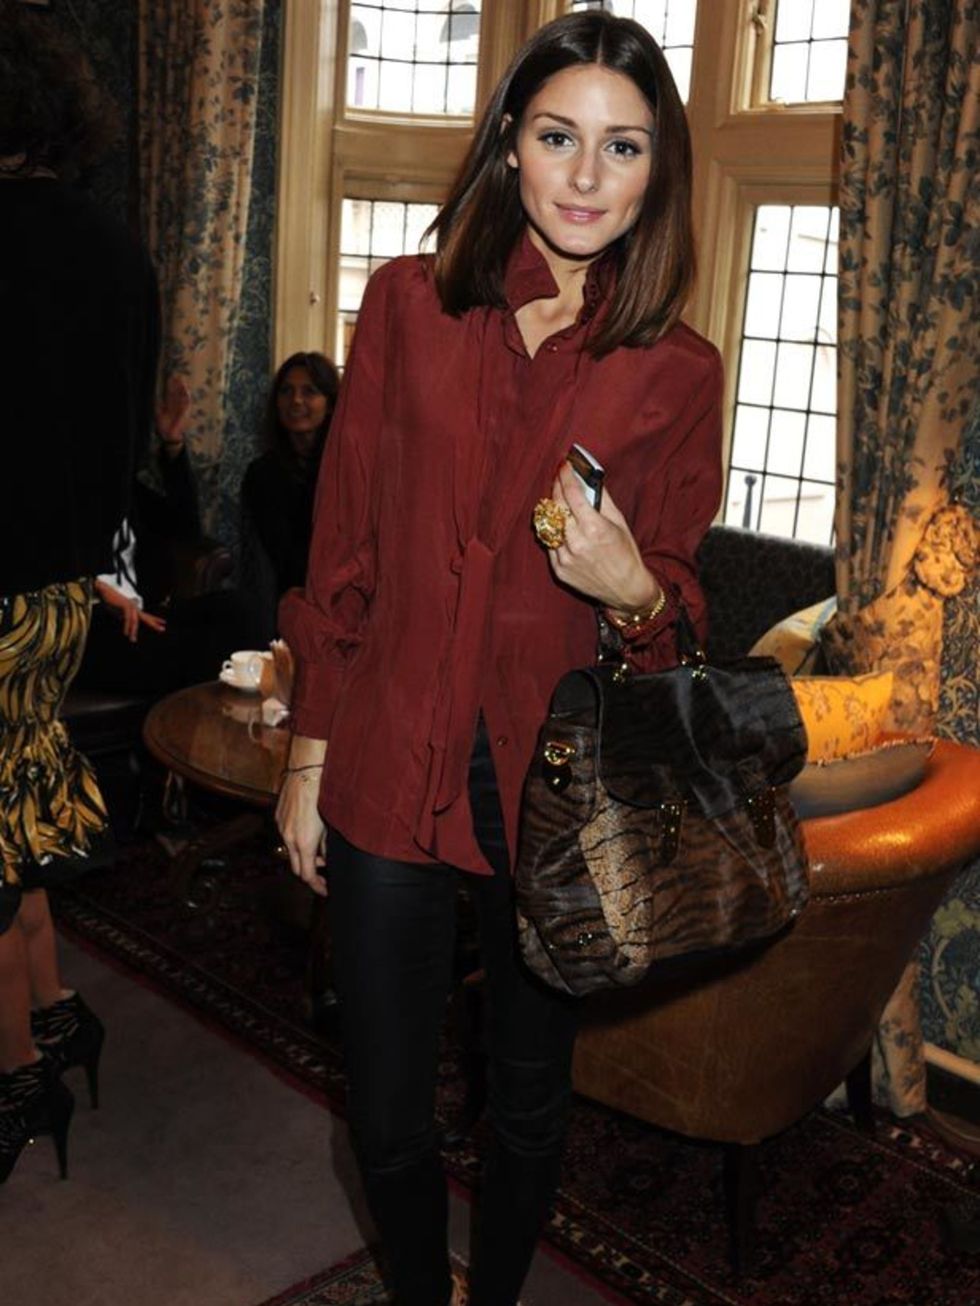 <p><a href="http://www.elleuk.com/starstyle/style-files/%28section%29/olivia-palermo">Olivia Palermo</a> wearing a red Mango blouse with <a href="http://www.elleuk.com/news/Fashion-News/charlotte-olympia-s-brand-new-store">Charlotte Olympia</a> leopard pr